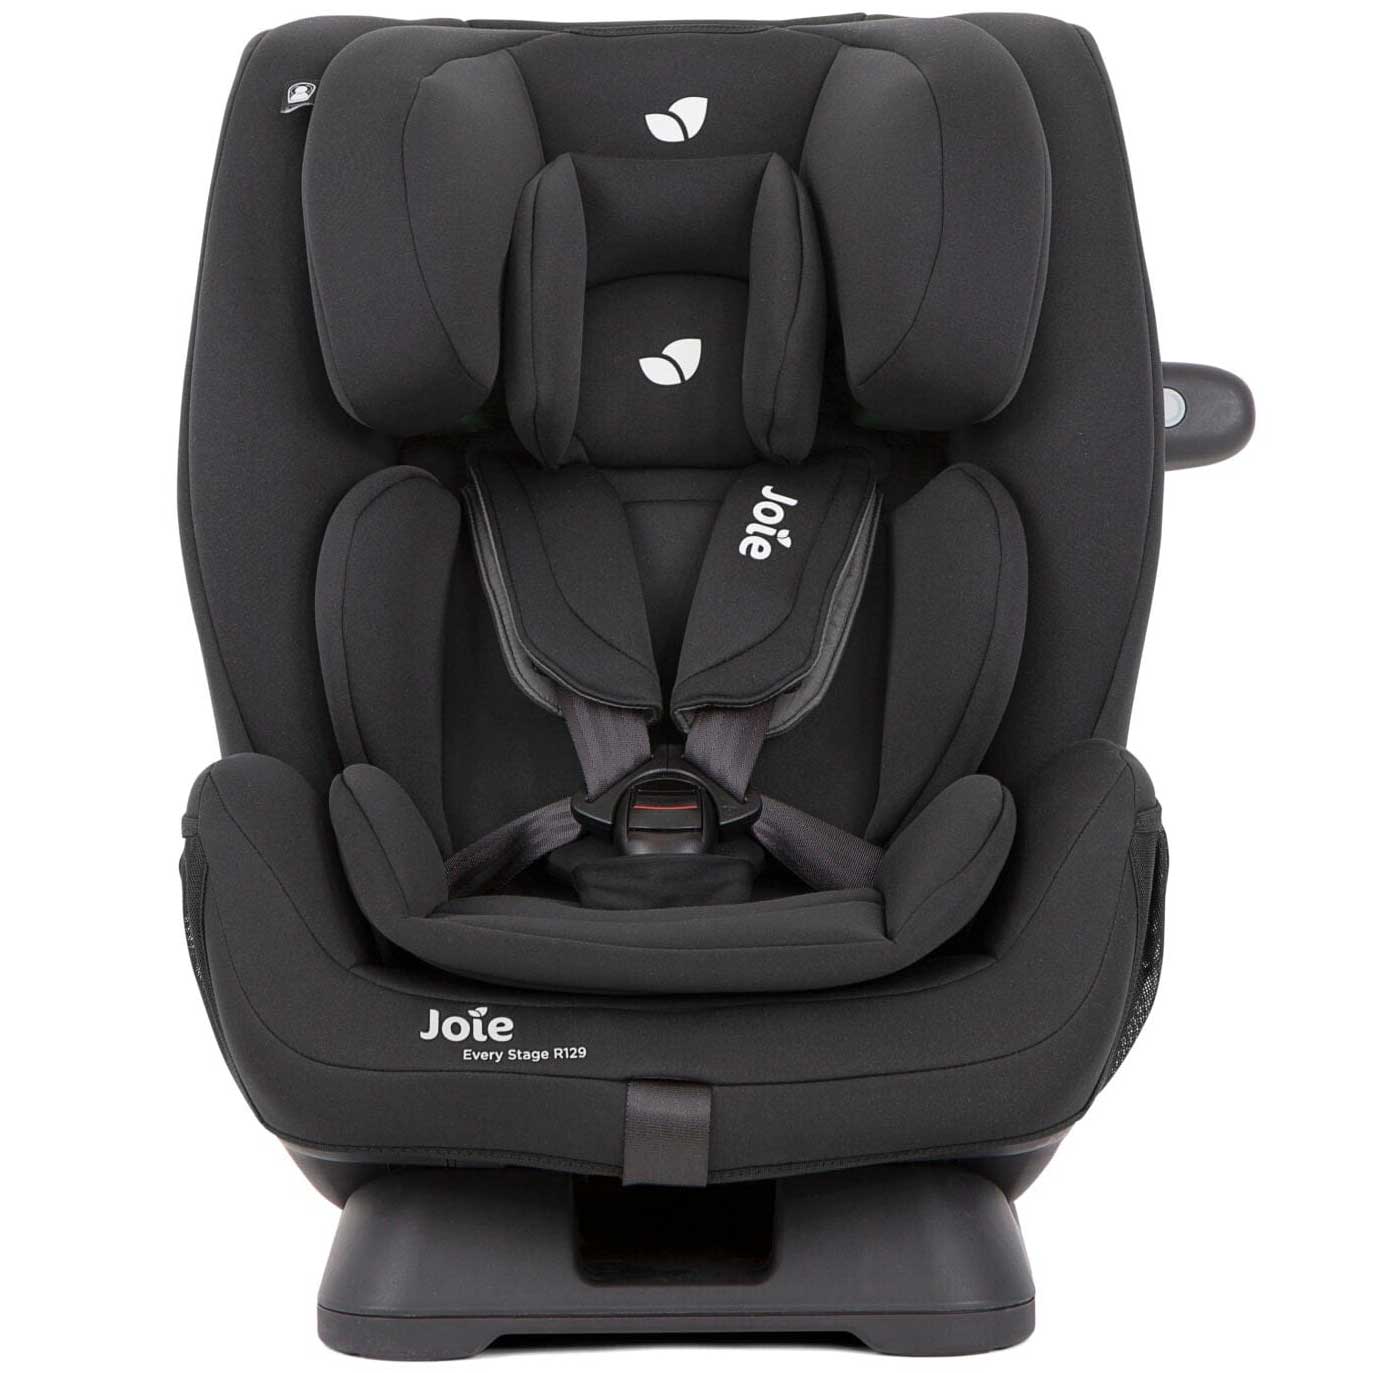 Joie combination car seats Joie Every Stage R129 - Shale C2117AASHA000